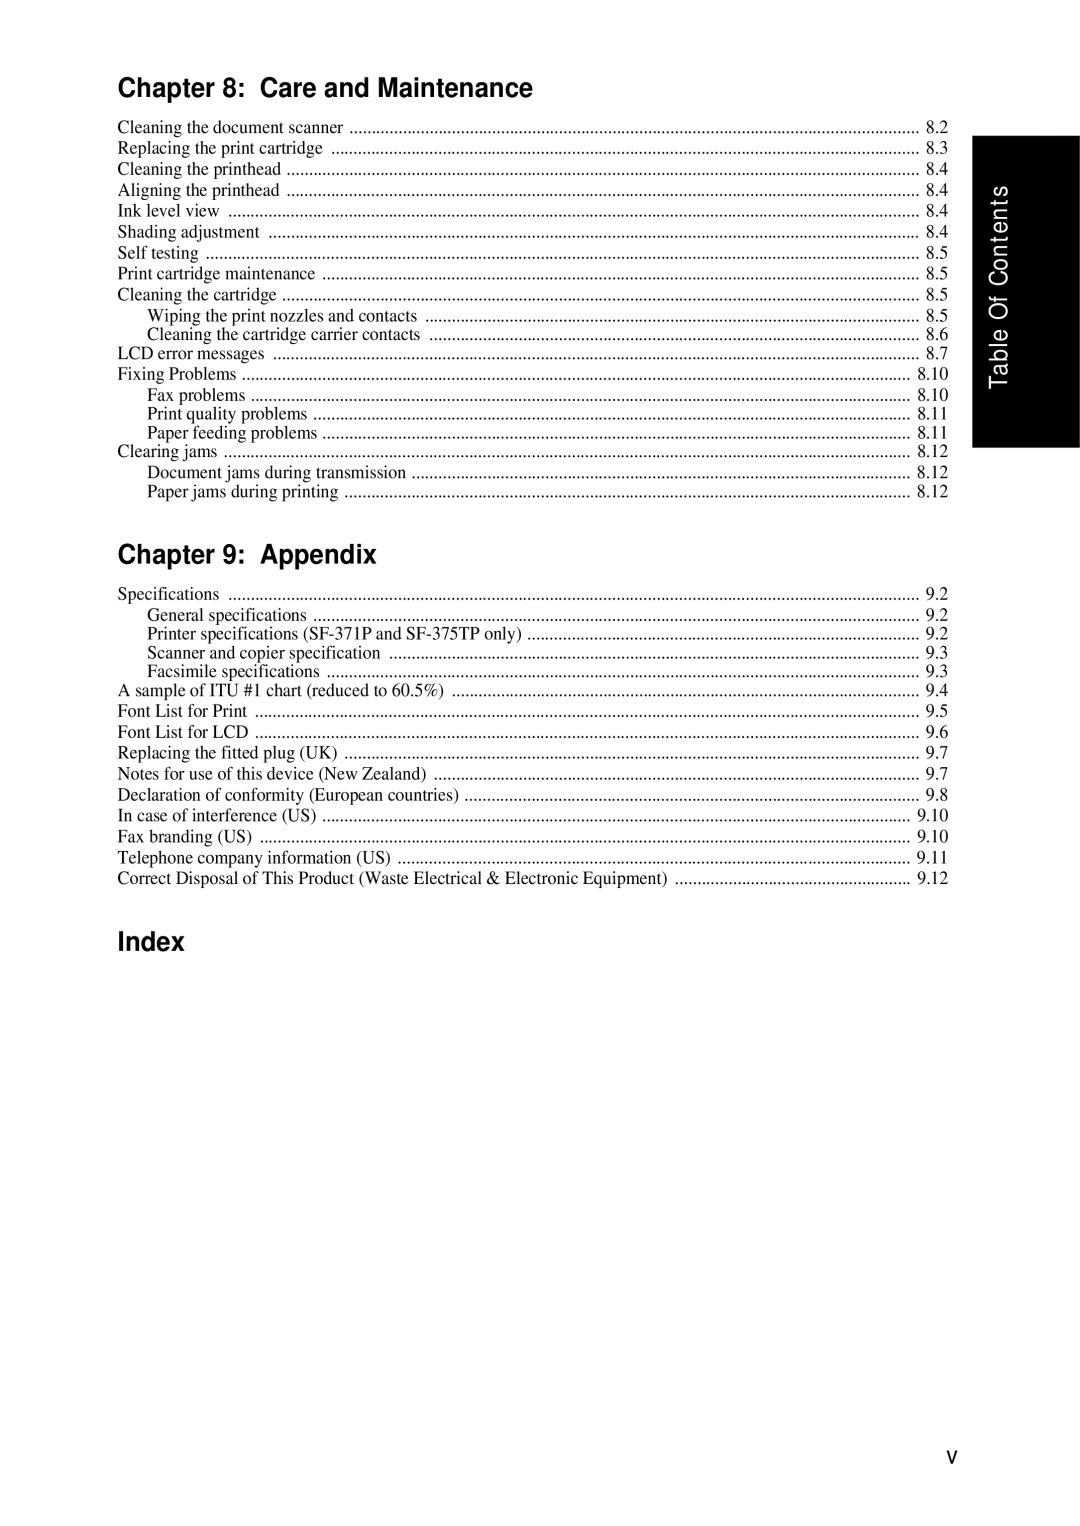 Samsung SF-370 Series manual Care and Maintenance, Appendix, Index 